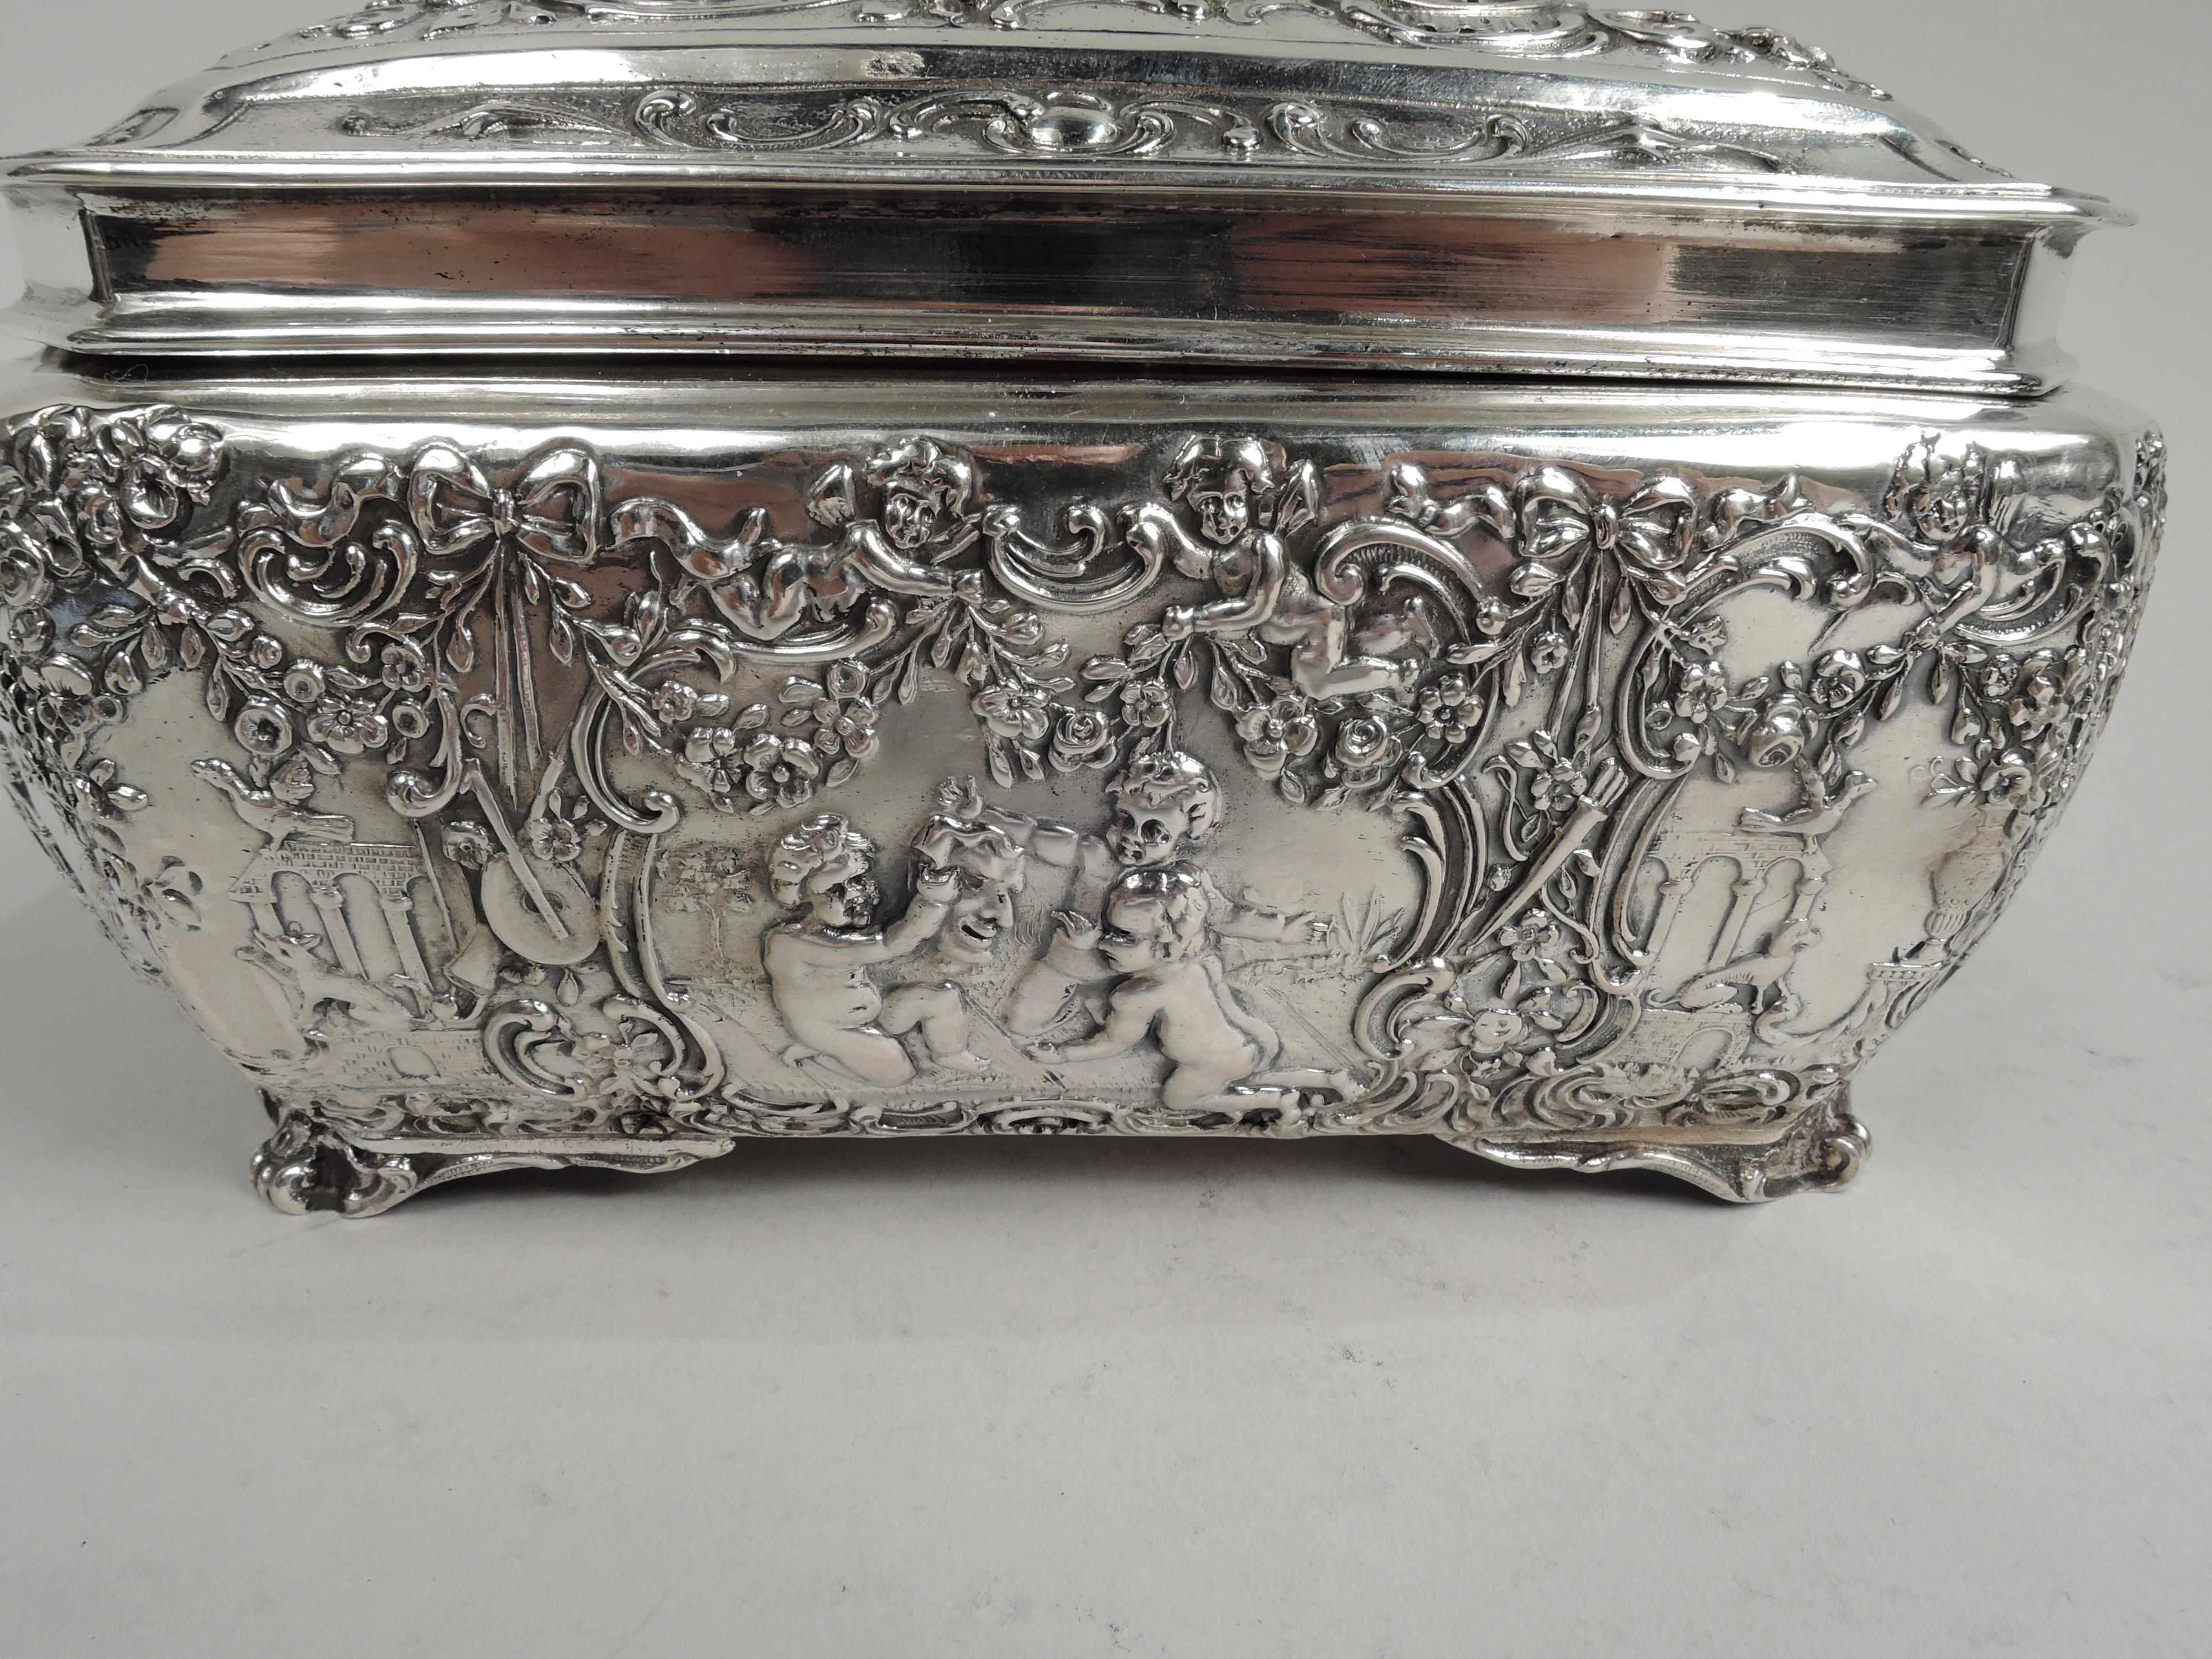 Turn-of-the-century German Rococo 800 silver box. Rectilinear with tapering sides and chamfered corners with scroll supports. Cover hinged, raised, and inset. Chased ornament with chubby, bare bottomed cherubs with adroitly arranged drapery